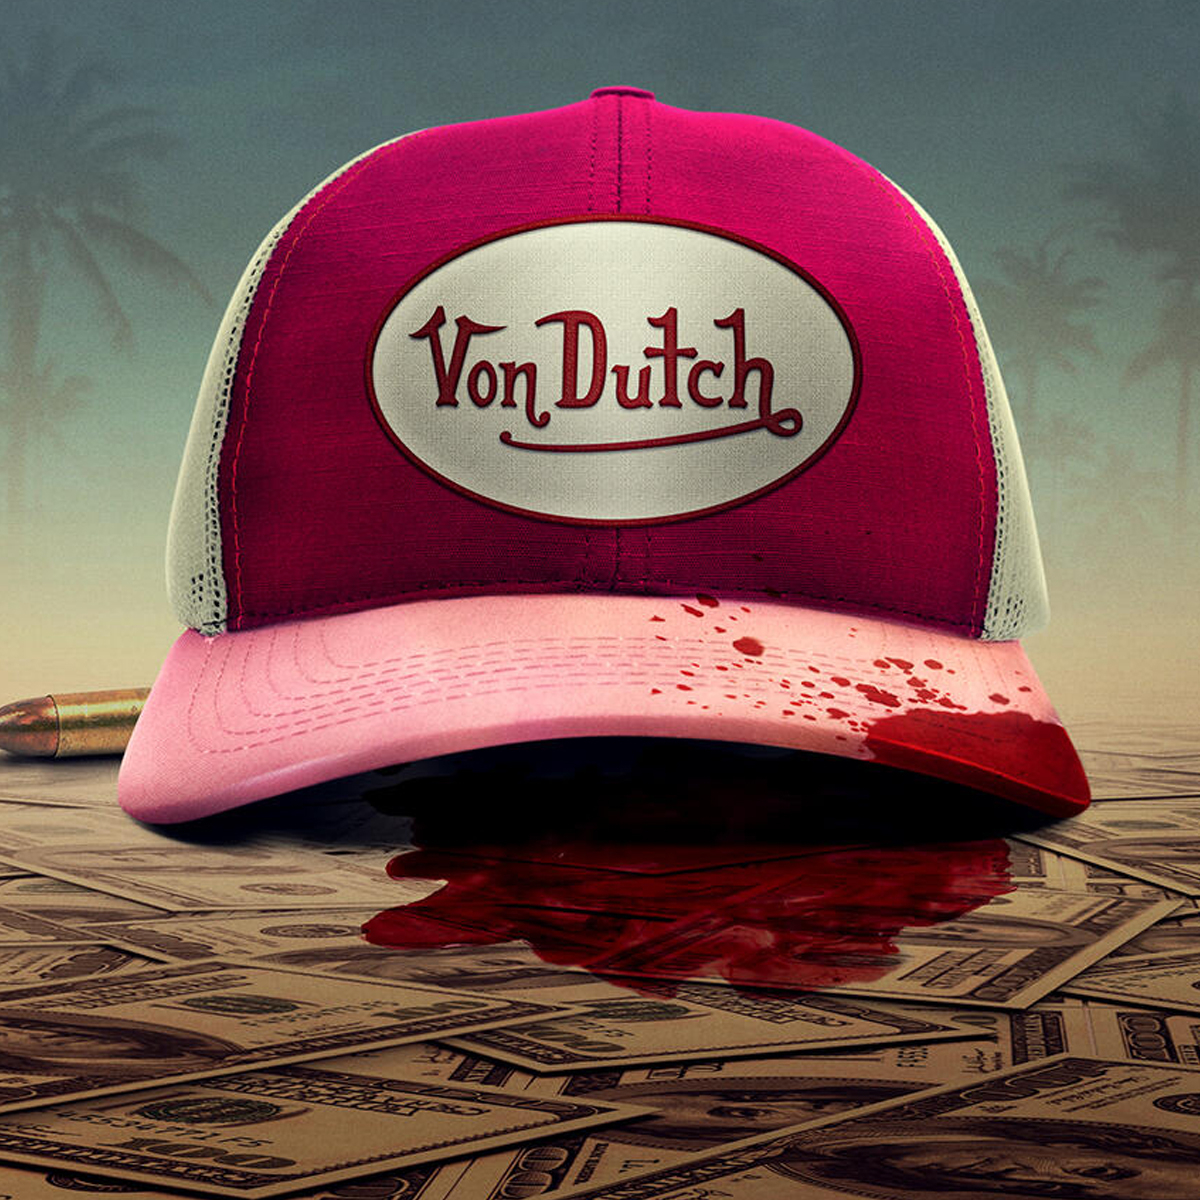 https://akns-images.eonline.com/eol_images/Entire_Site/2021104/rs_1200x1200-211104112846-1200-The-Curse-Of-Von-Dutch-LT-11421-Hulu.jpg?fit=around%7C1080:540&output-quality=90&crop=1080:540;center,top